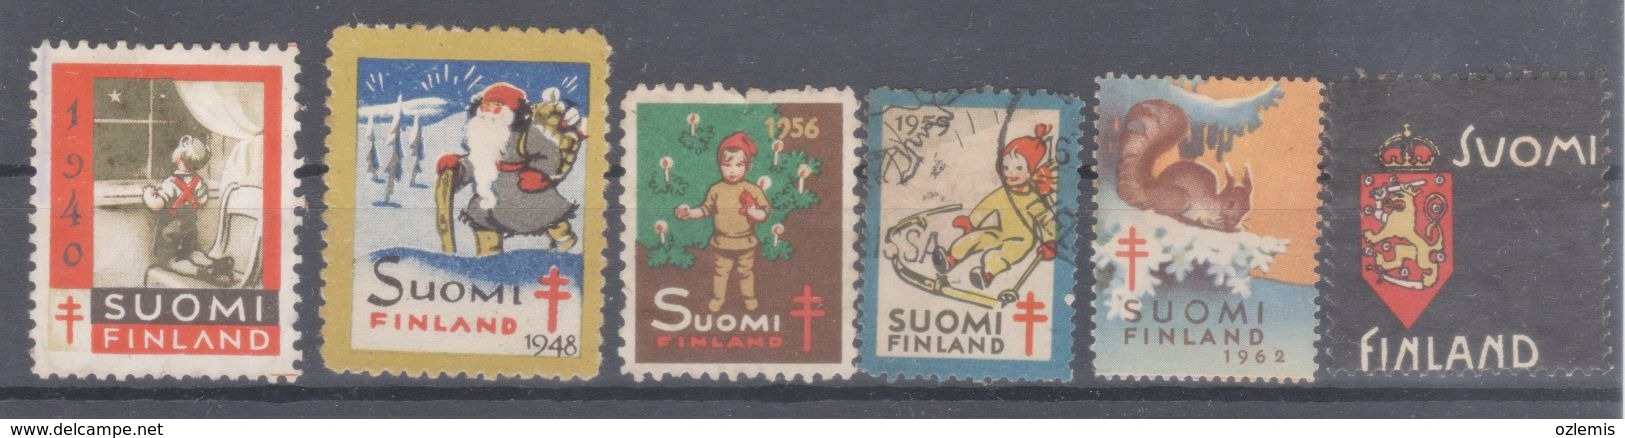 SUOMI FINLAND  CHRISTMAS CHARITY -JUL LABELS ,VIGNETTE - Christmas